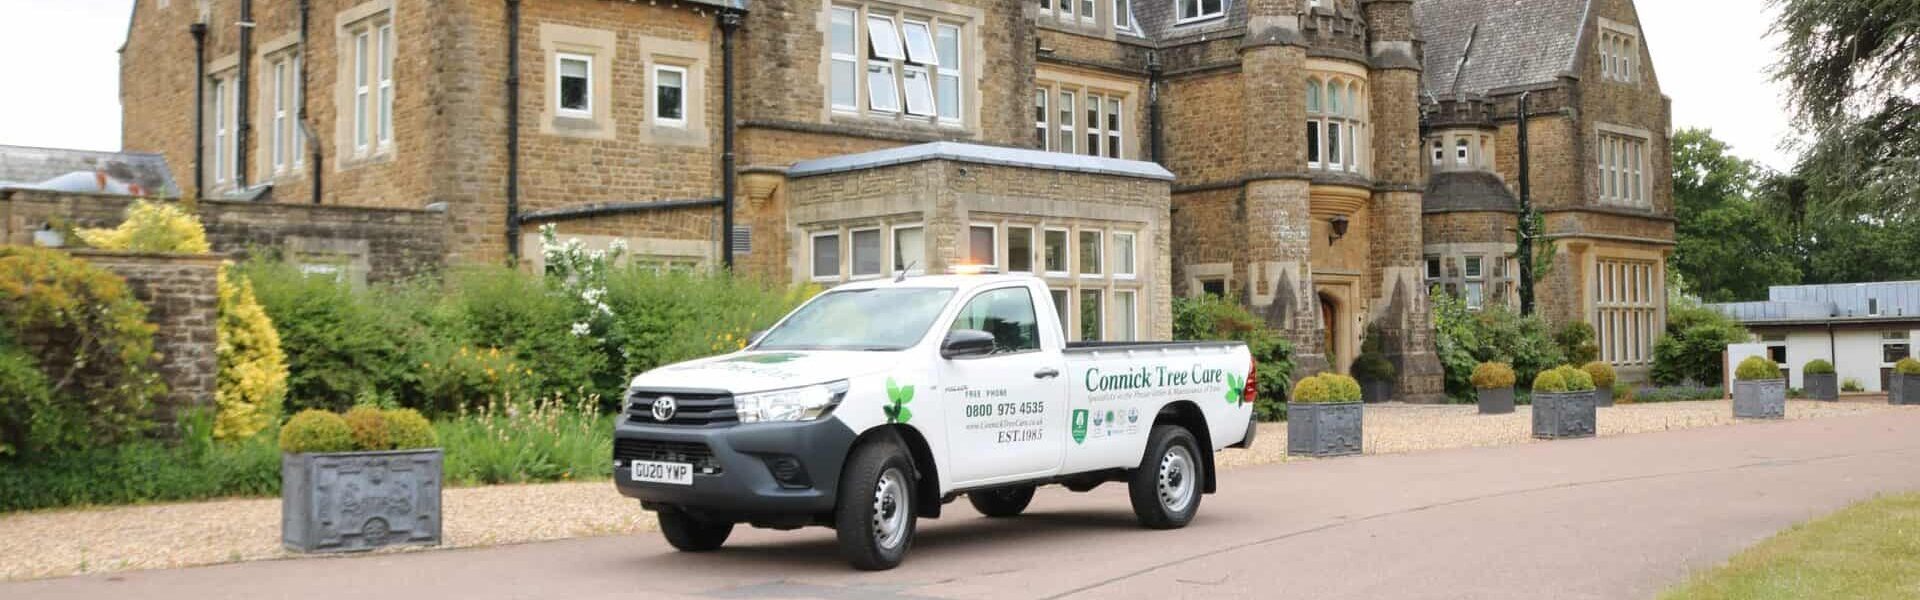 Connick Tree Care pick up truck